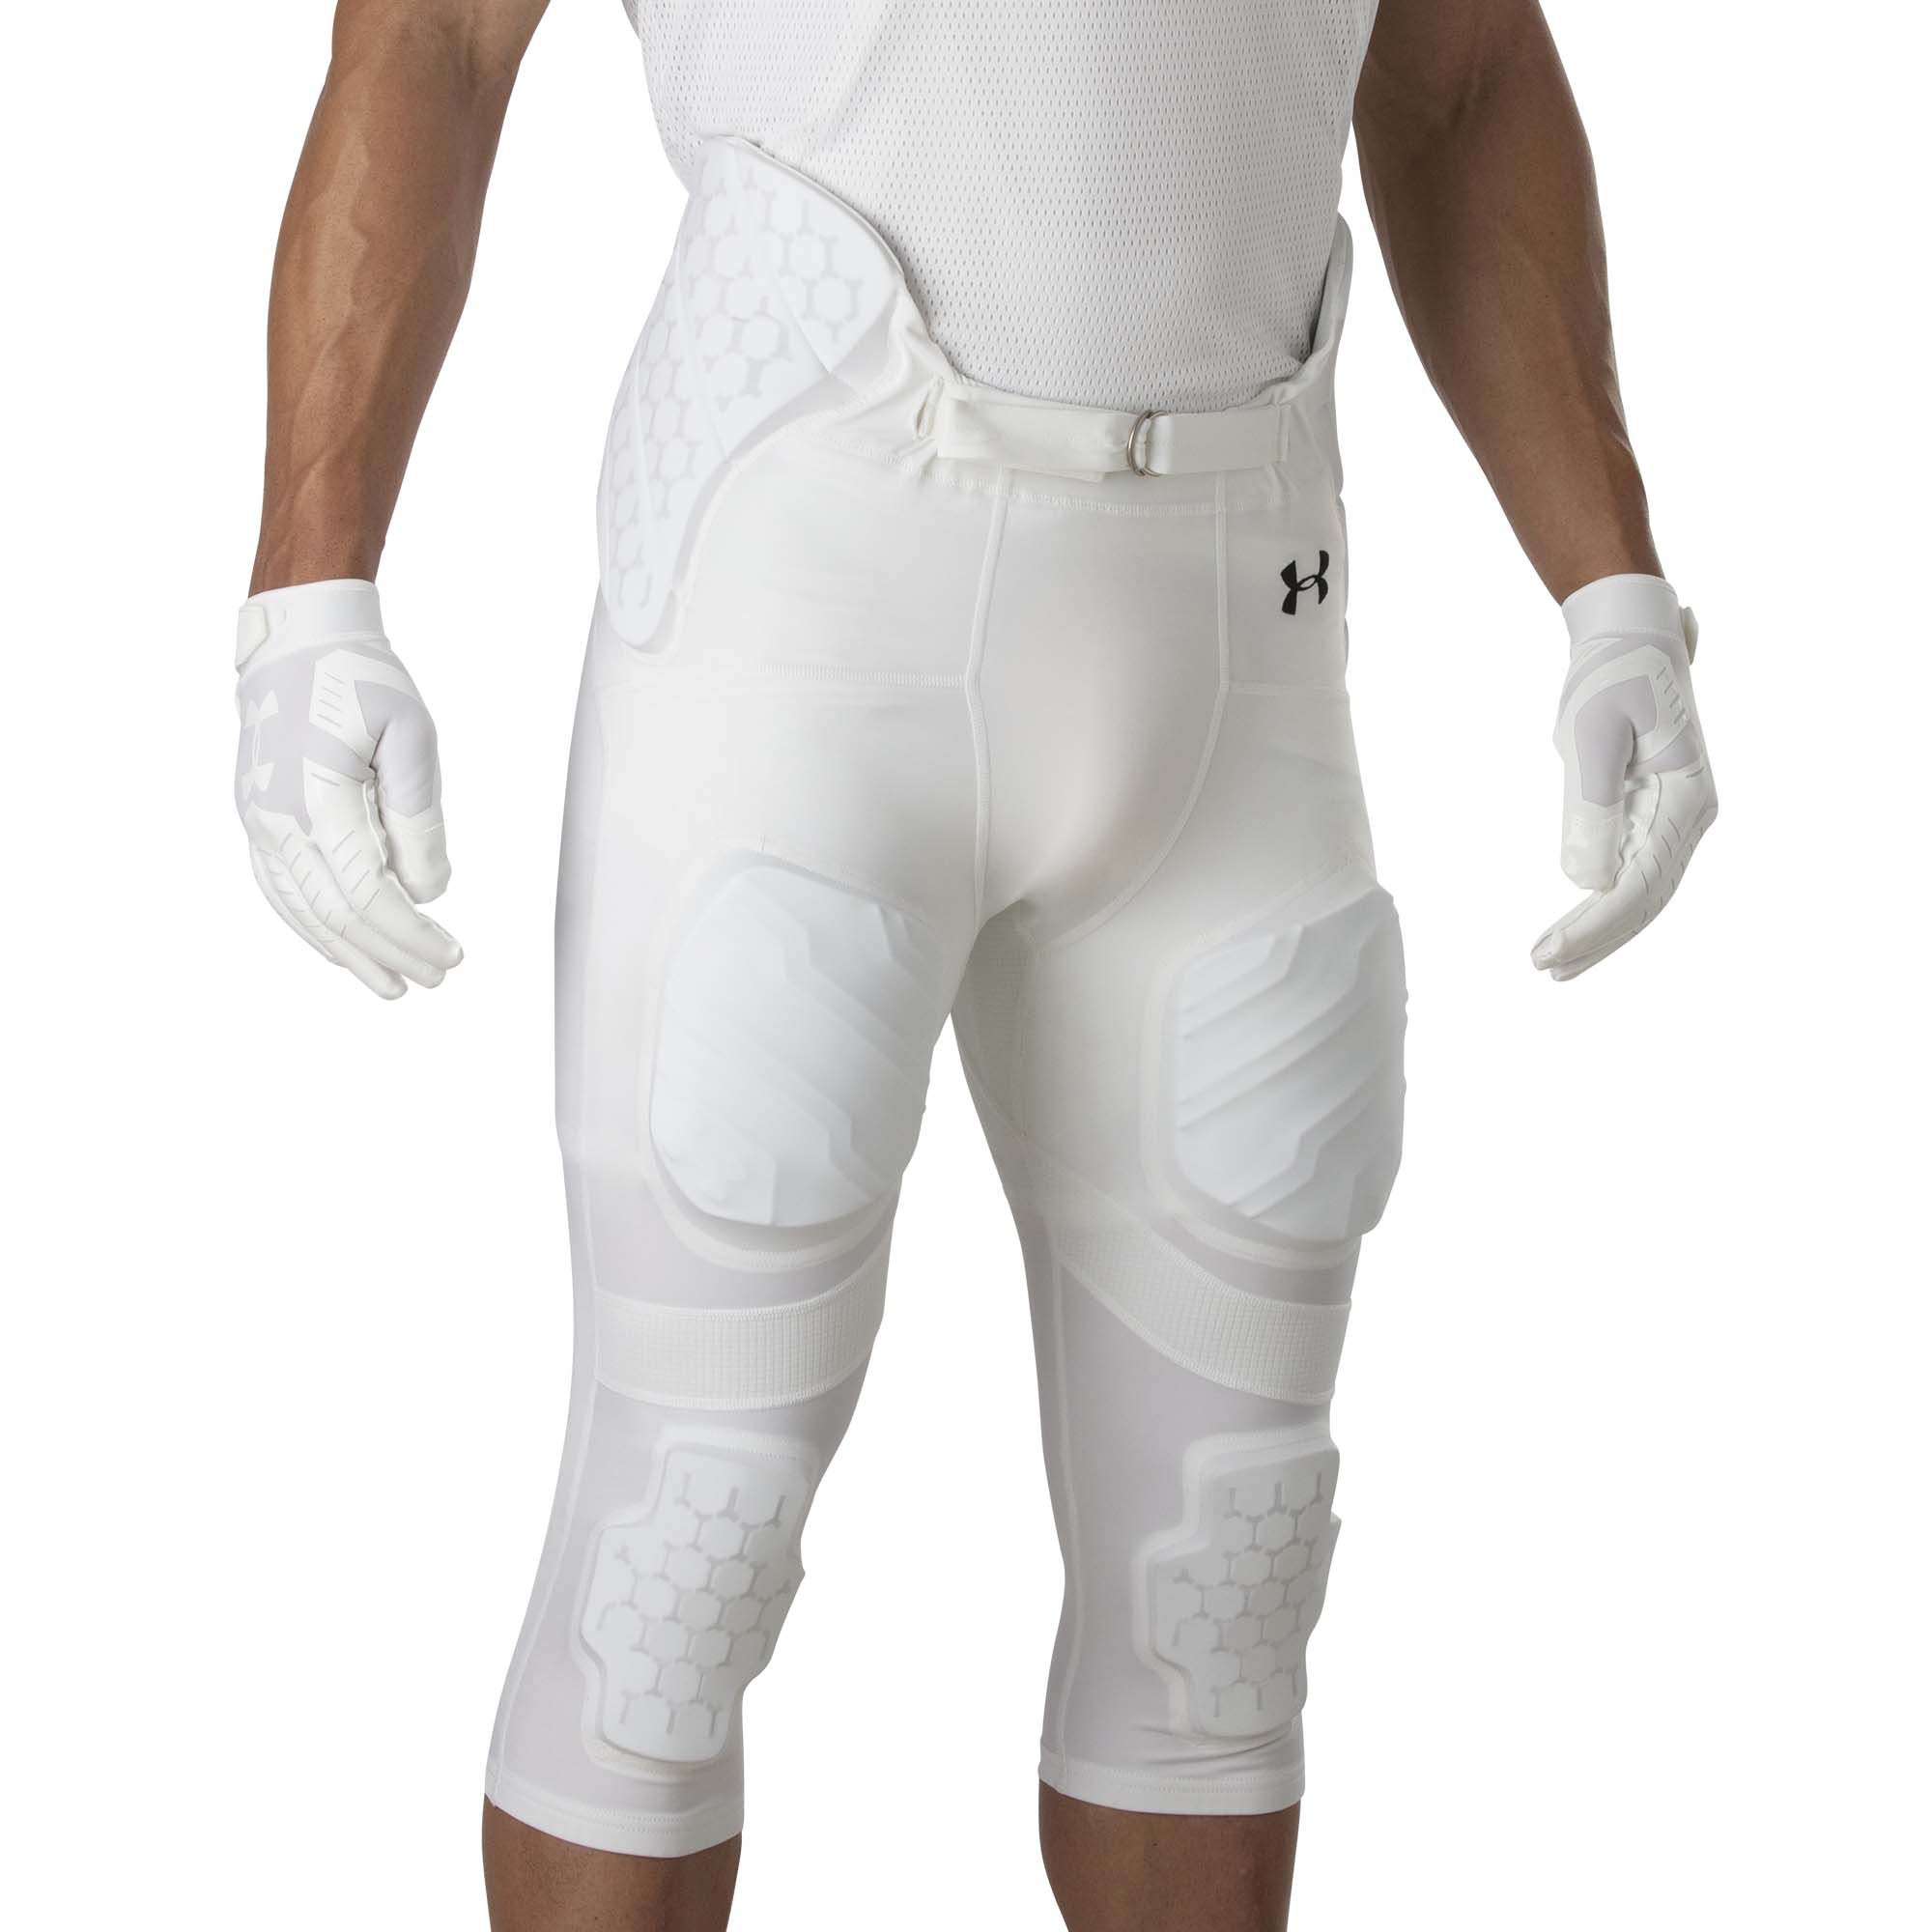 Under Armour - UFPPM1 Adult Integrated Football Pant with pads and belt